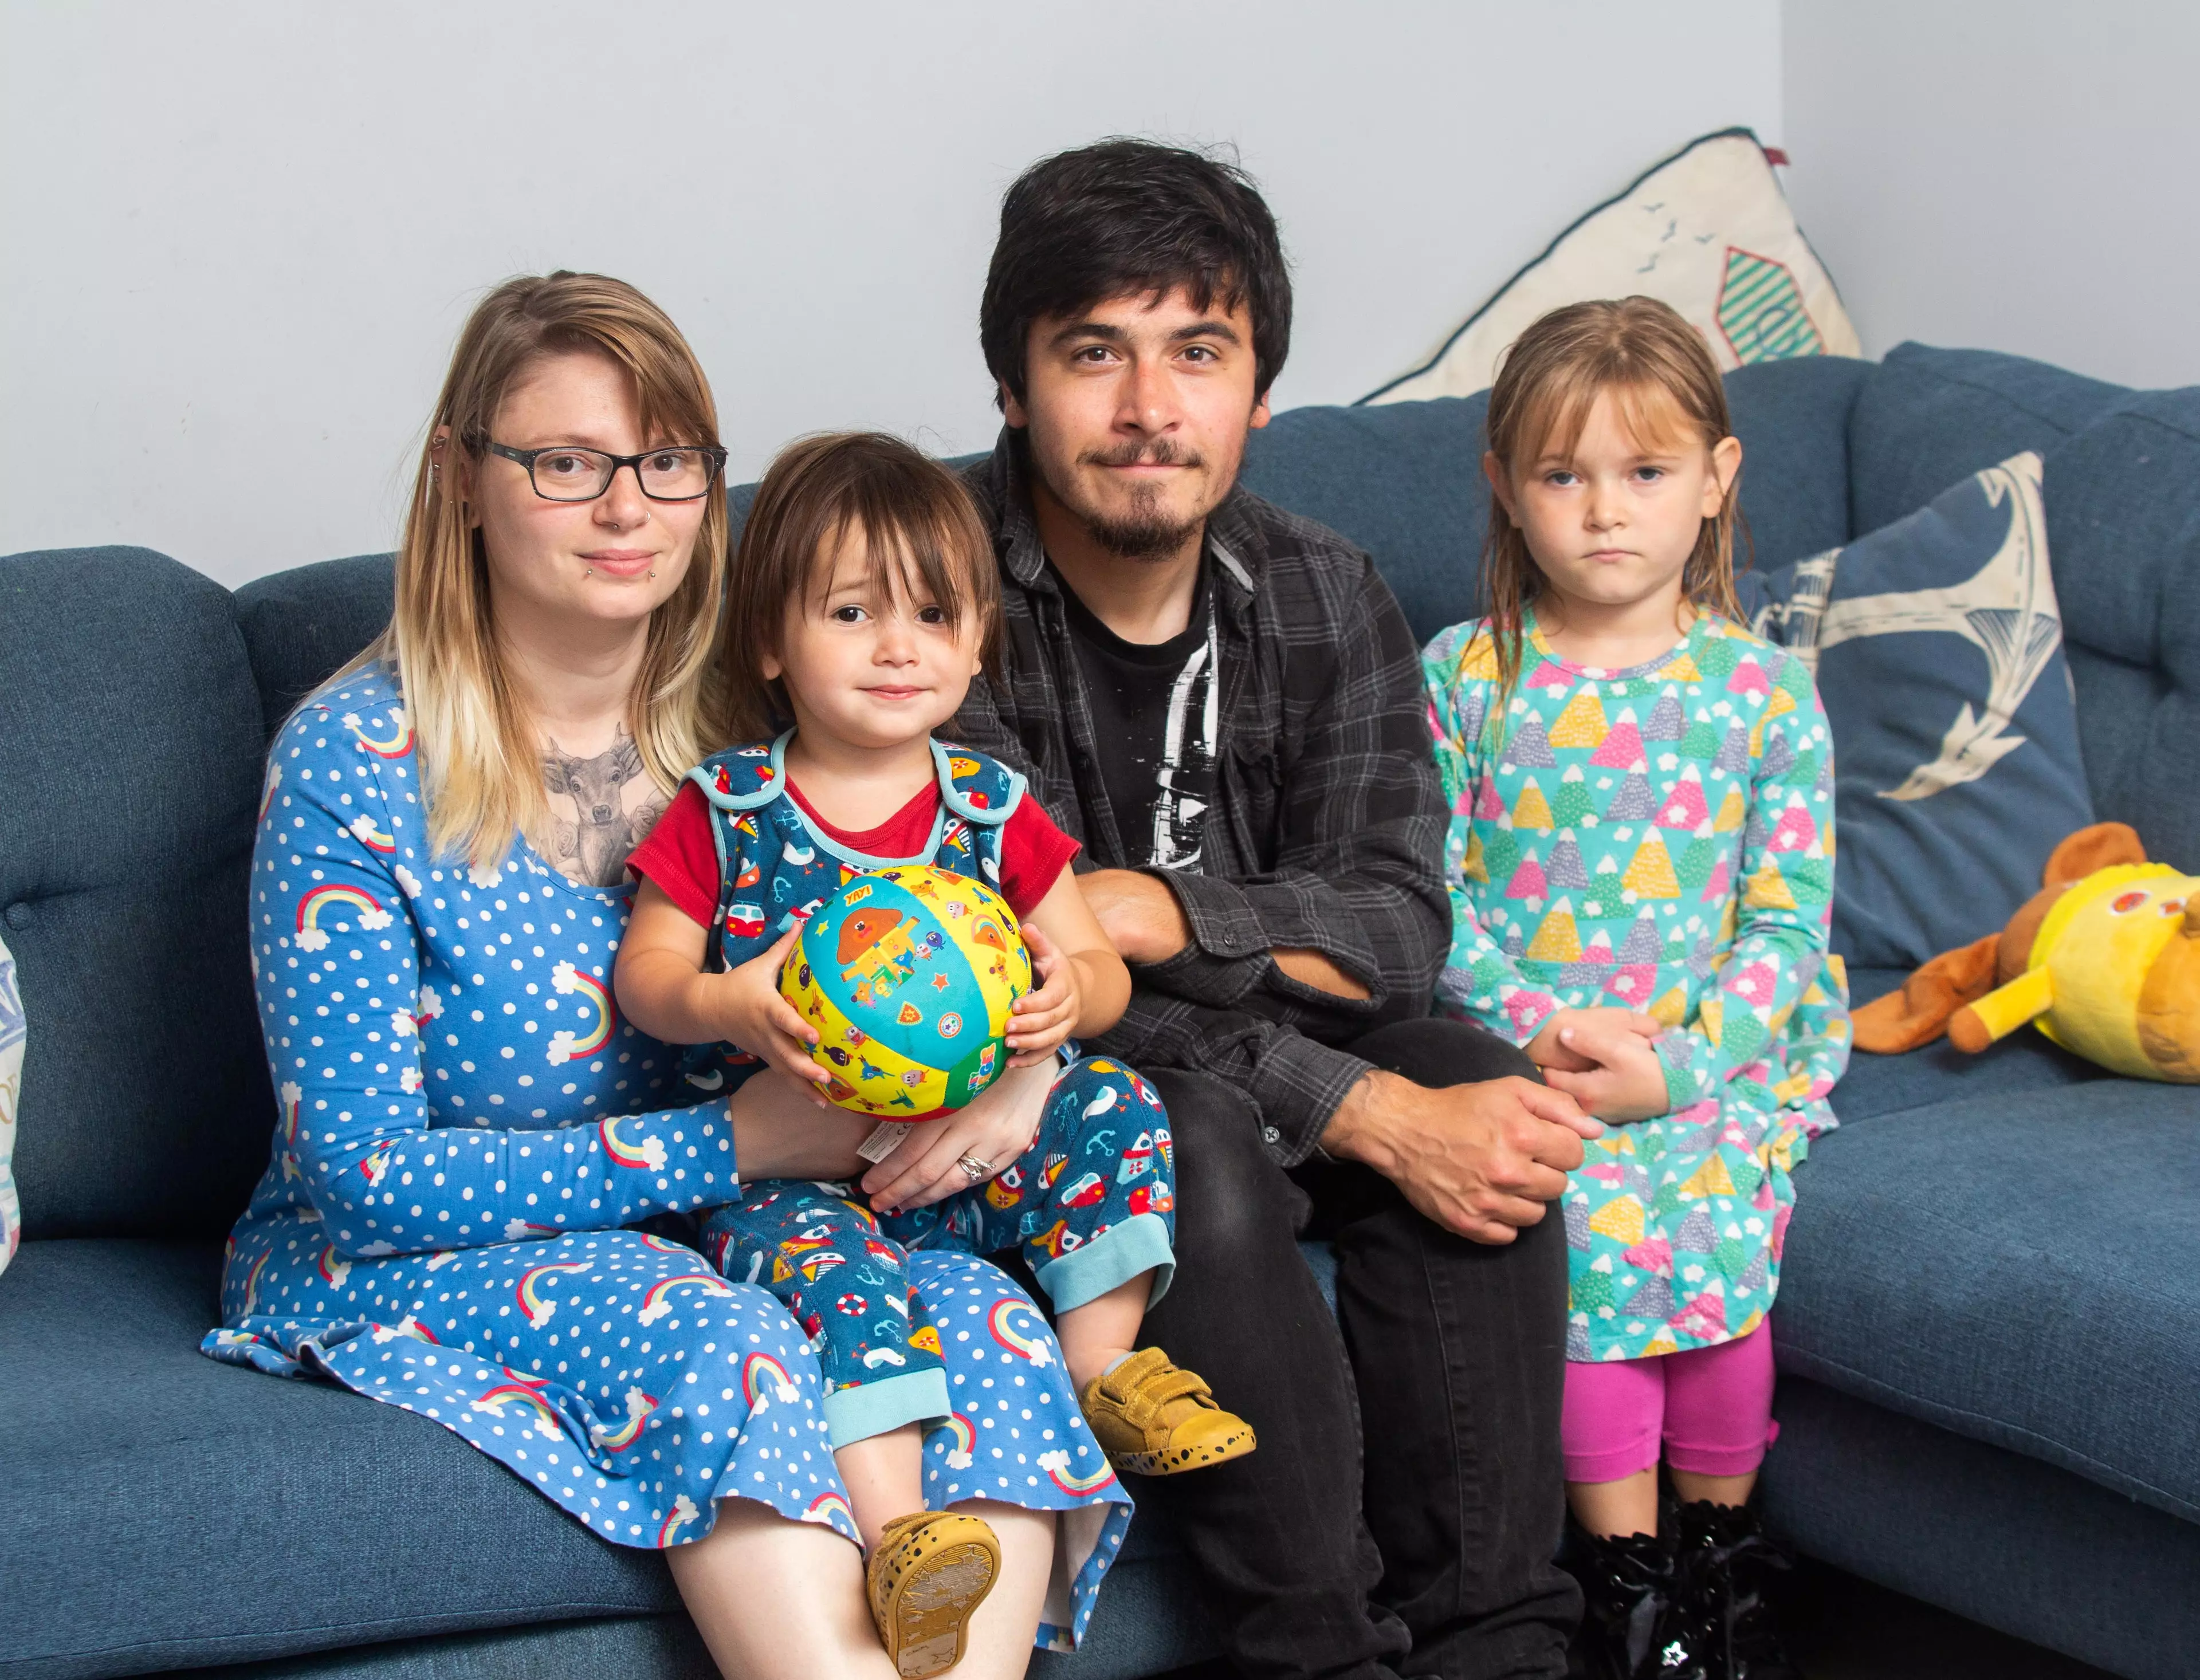 Hayleigh's family have learnt to live with her Tourette's (